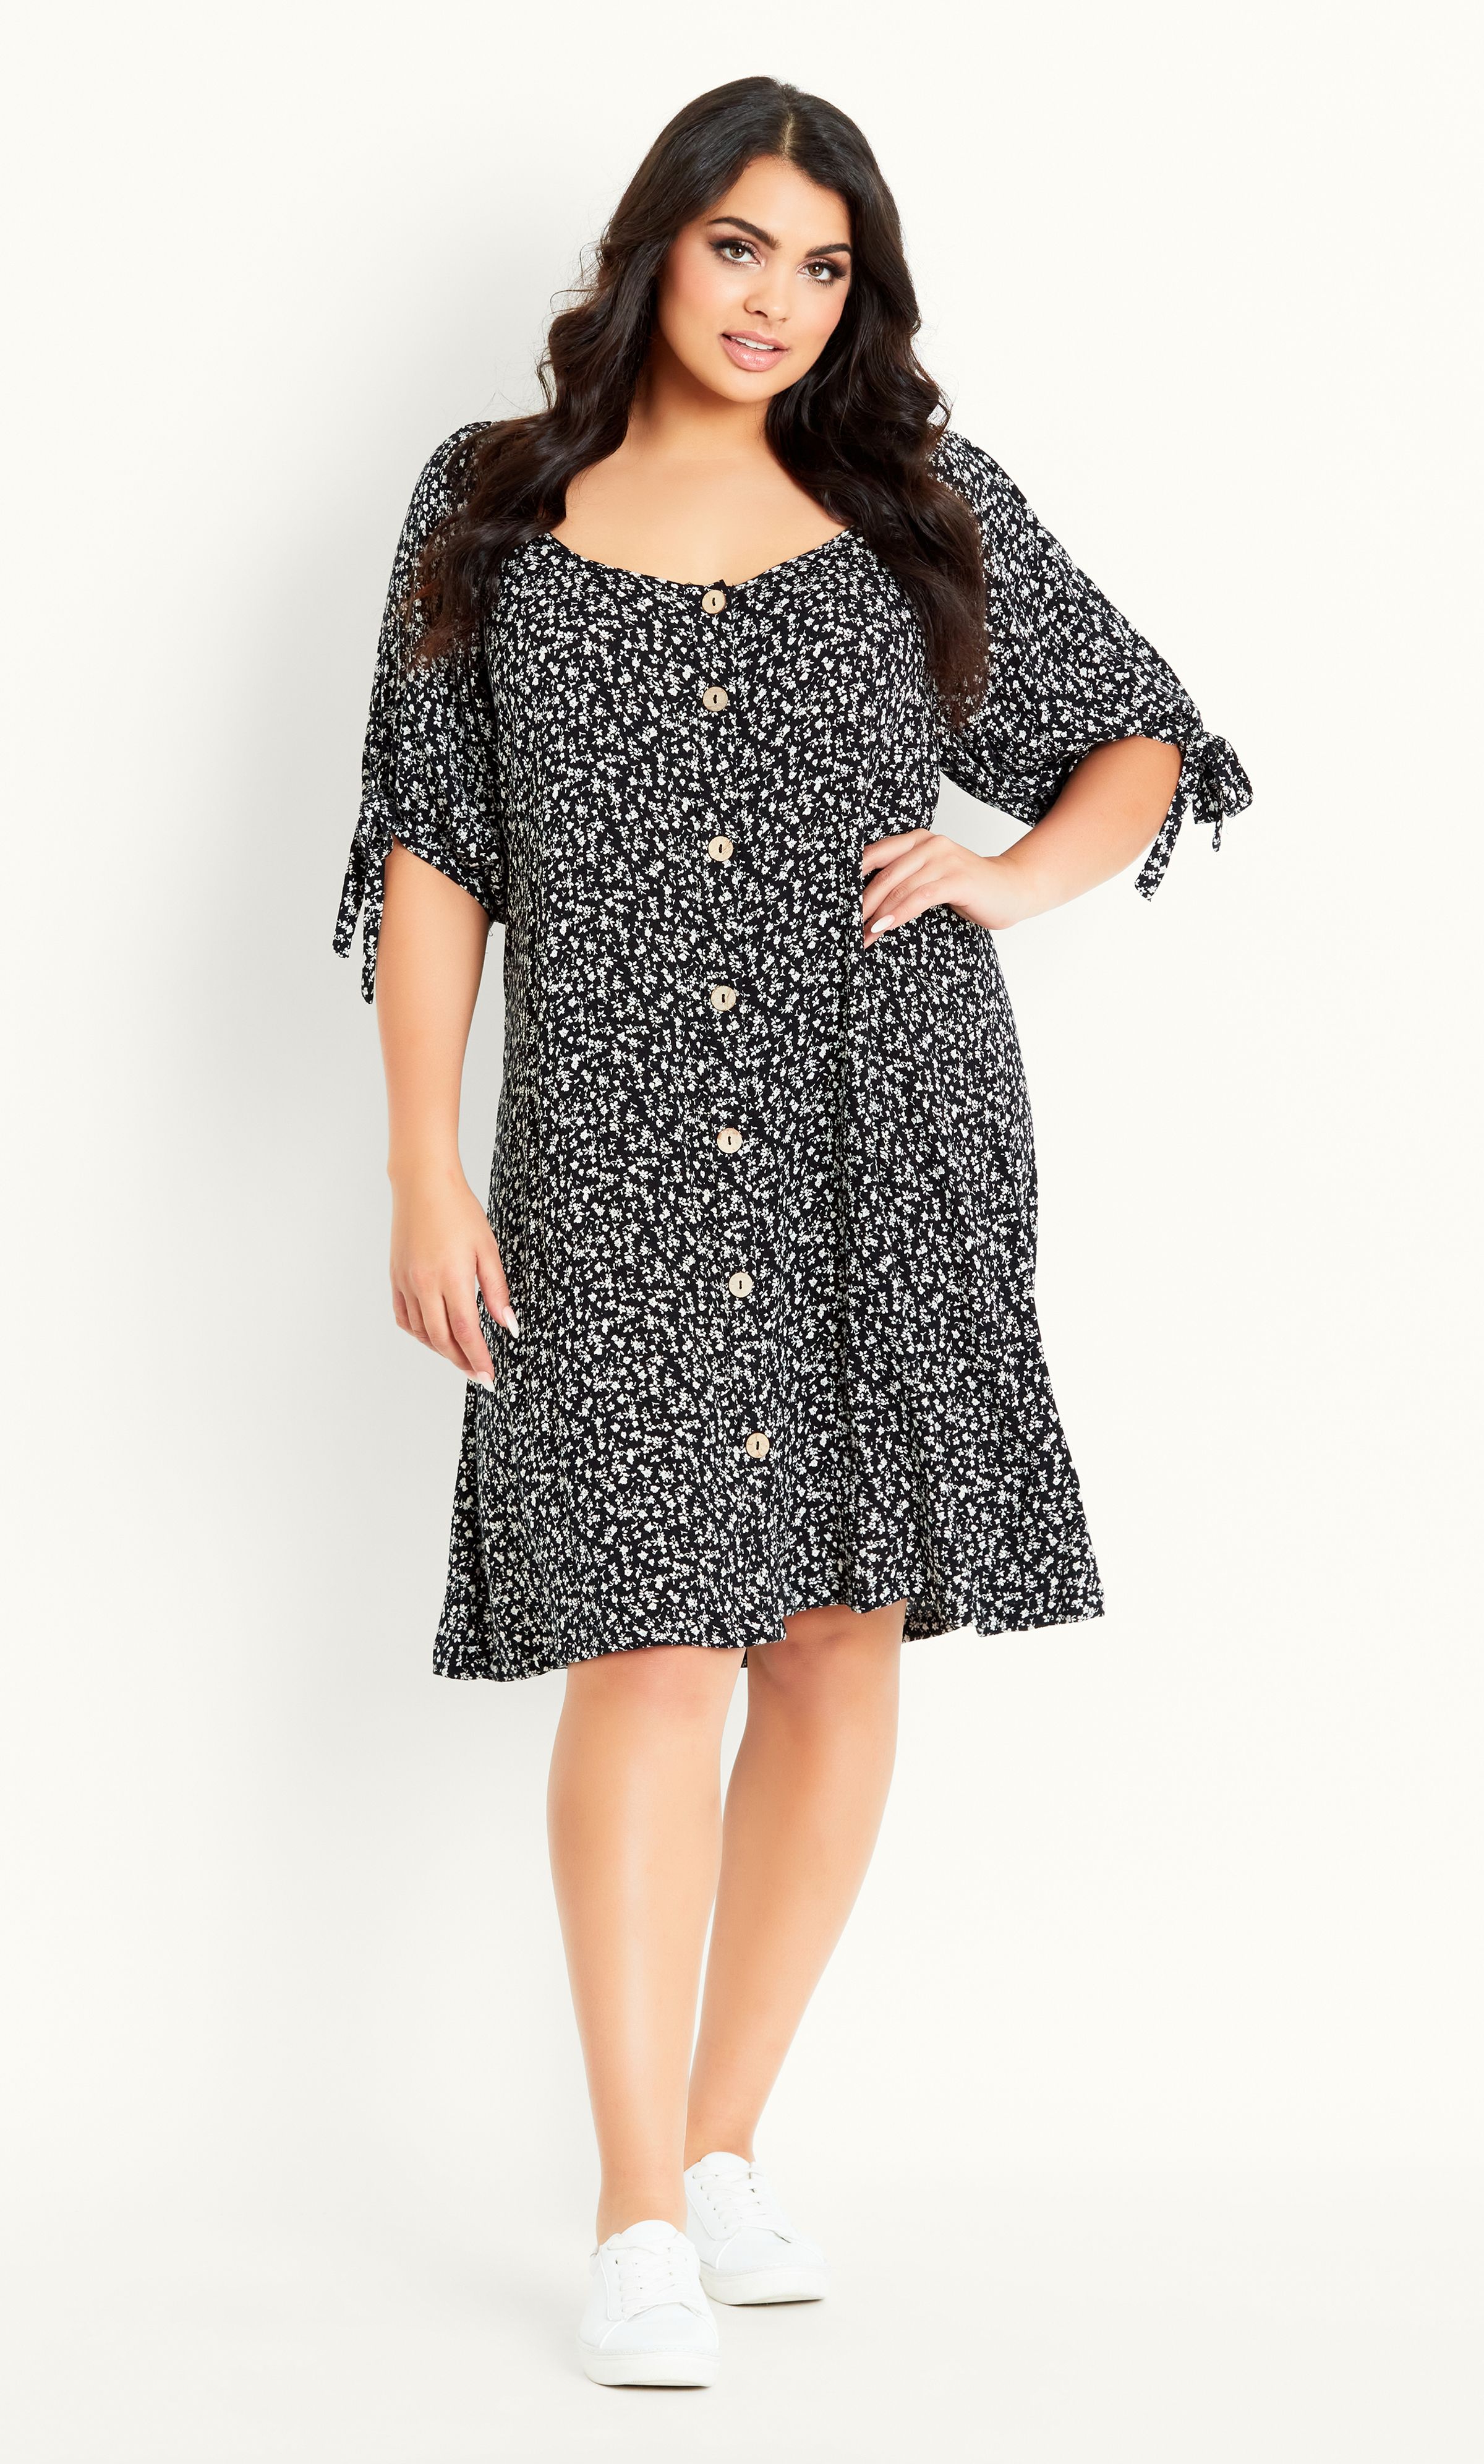 Whether you're off on a shopping spree or taking a beachside stroll, the Ditsy Tie Sleeve Dress has you covered! Offering a sweet buttoned front, wide scoop neckline and knee length hem, this day dress ticks all the boxes. Key Features Include: - Wide scoop neckline - Elbow-length sleeves with tie feature - Buttoned front - Unlined - Relaxed fit - Knee length Finish with white trainers and your favourite tote.